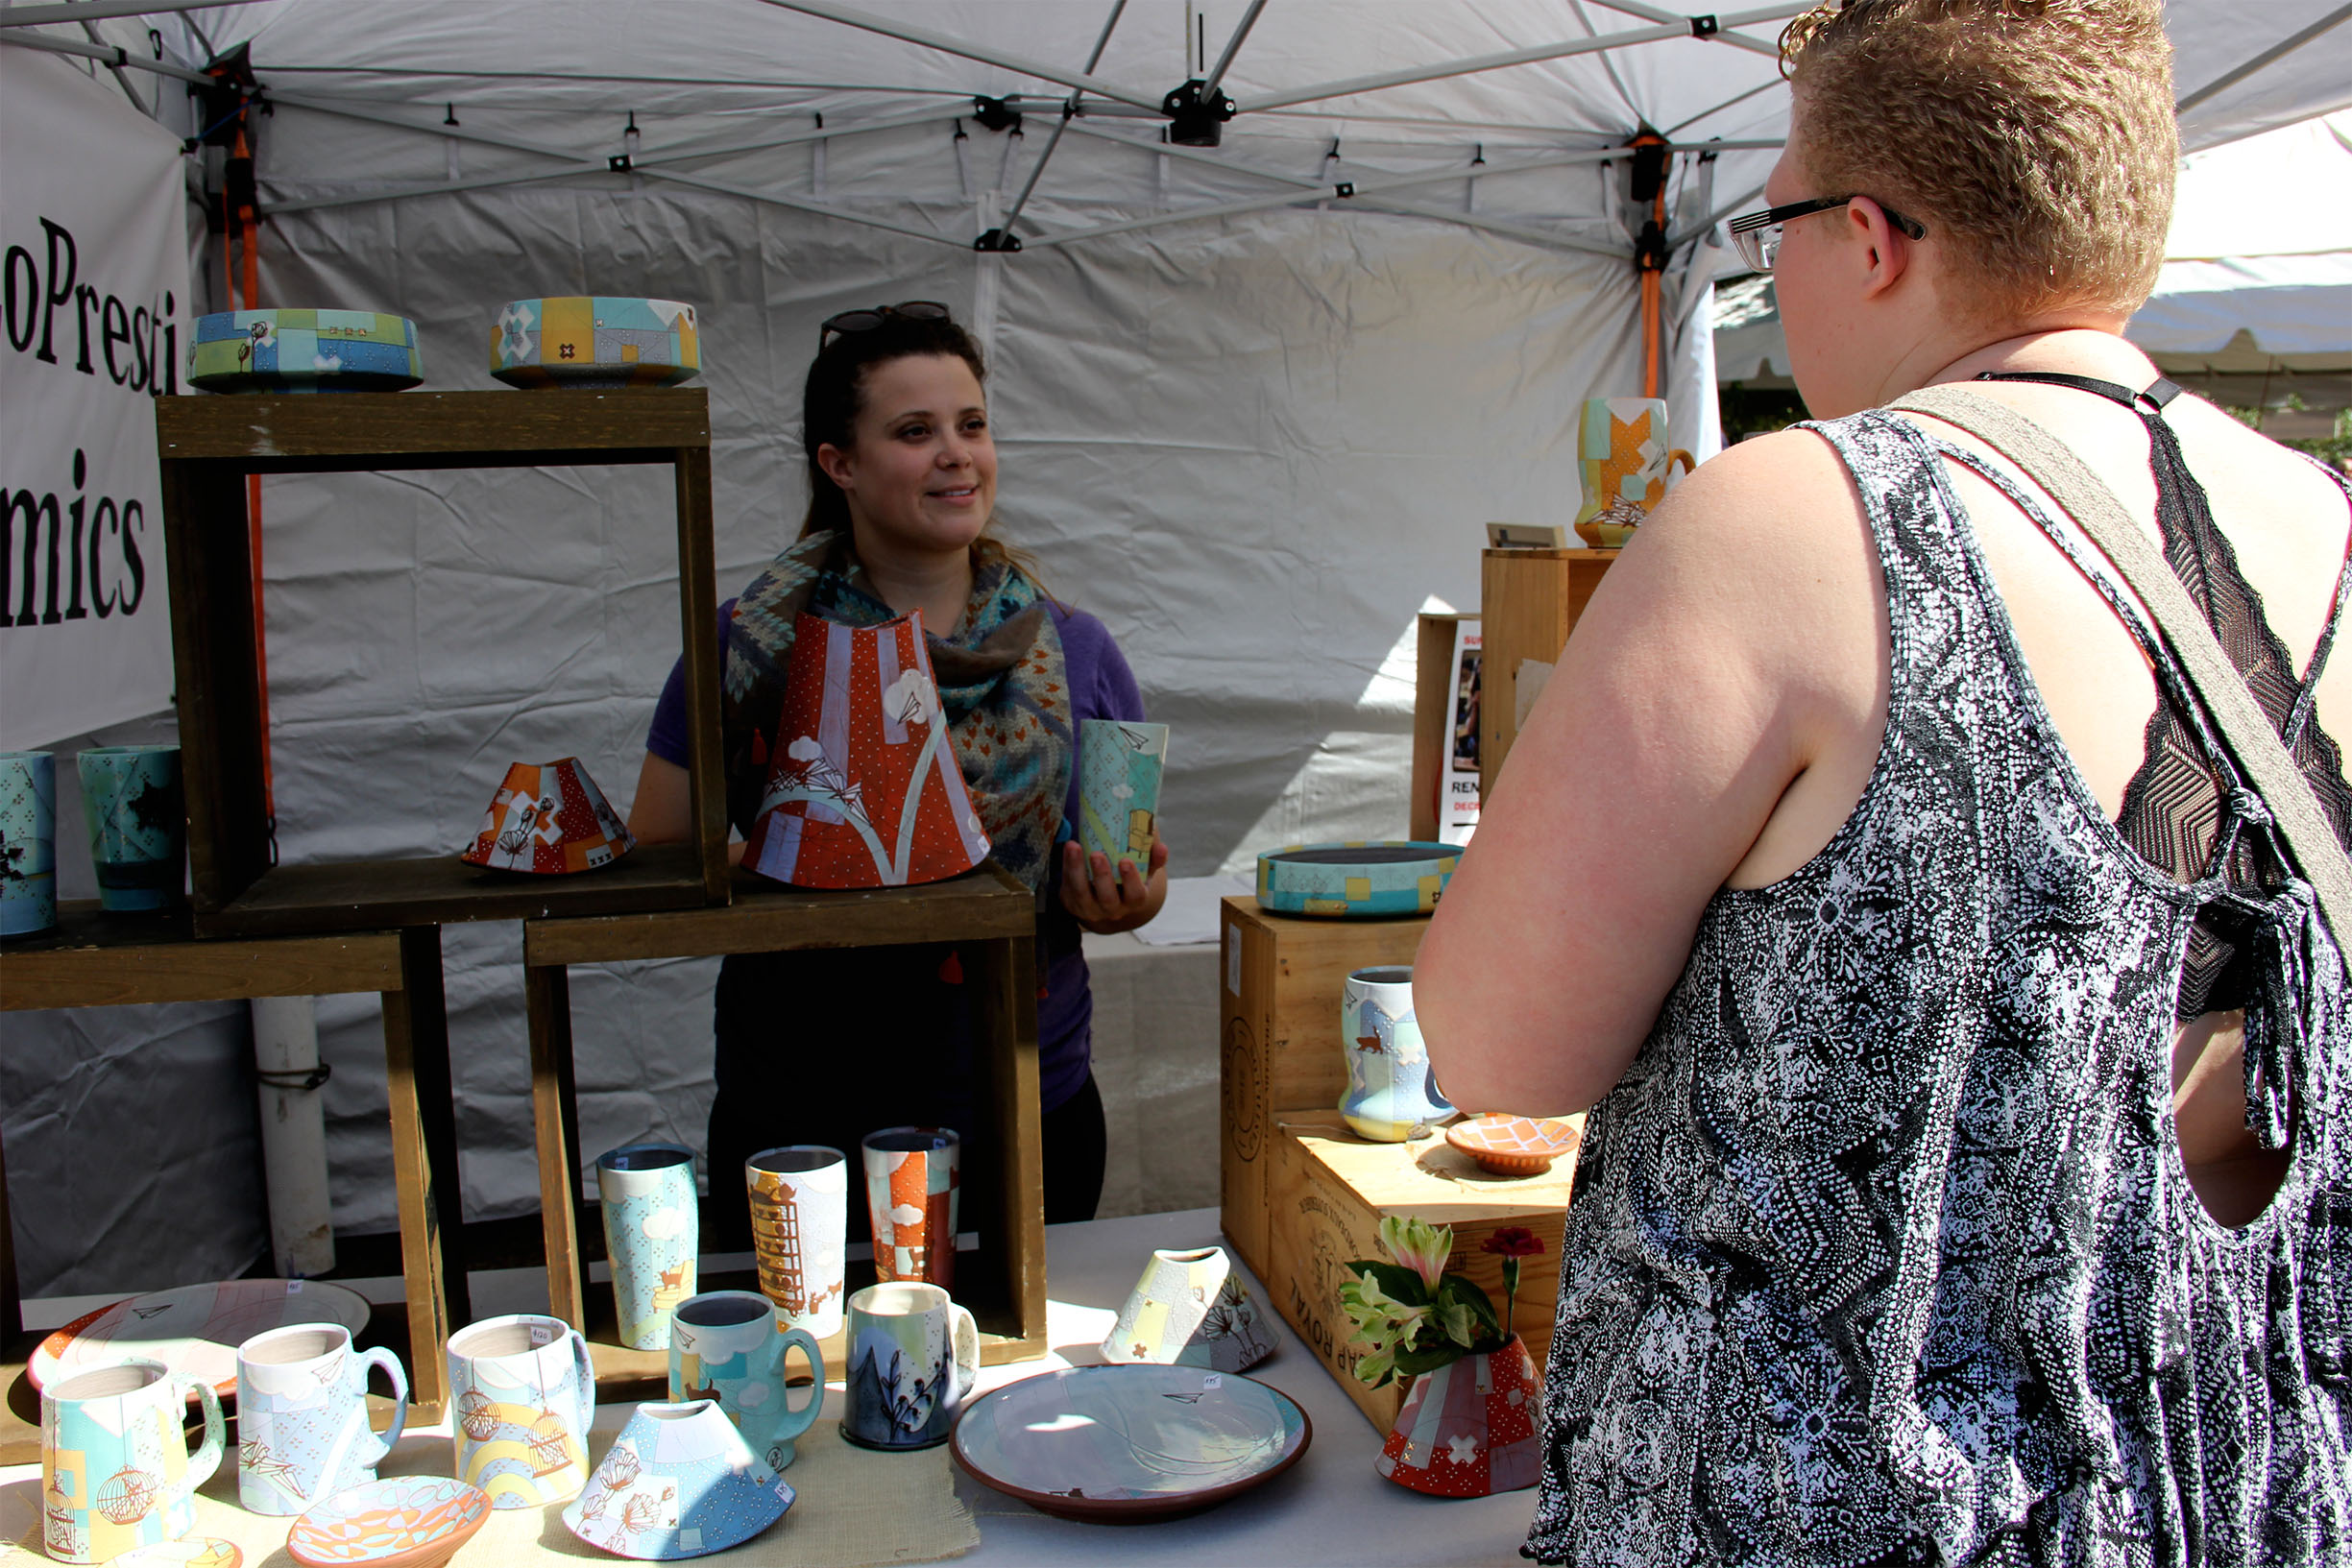 PHOTO: One of the youngest artists accepted this year, Renee LoPresti talks with a festival guest about her work. Photo by The Signal Online Editor Alyssa Shotwell.